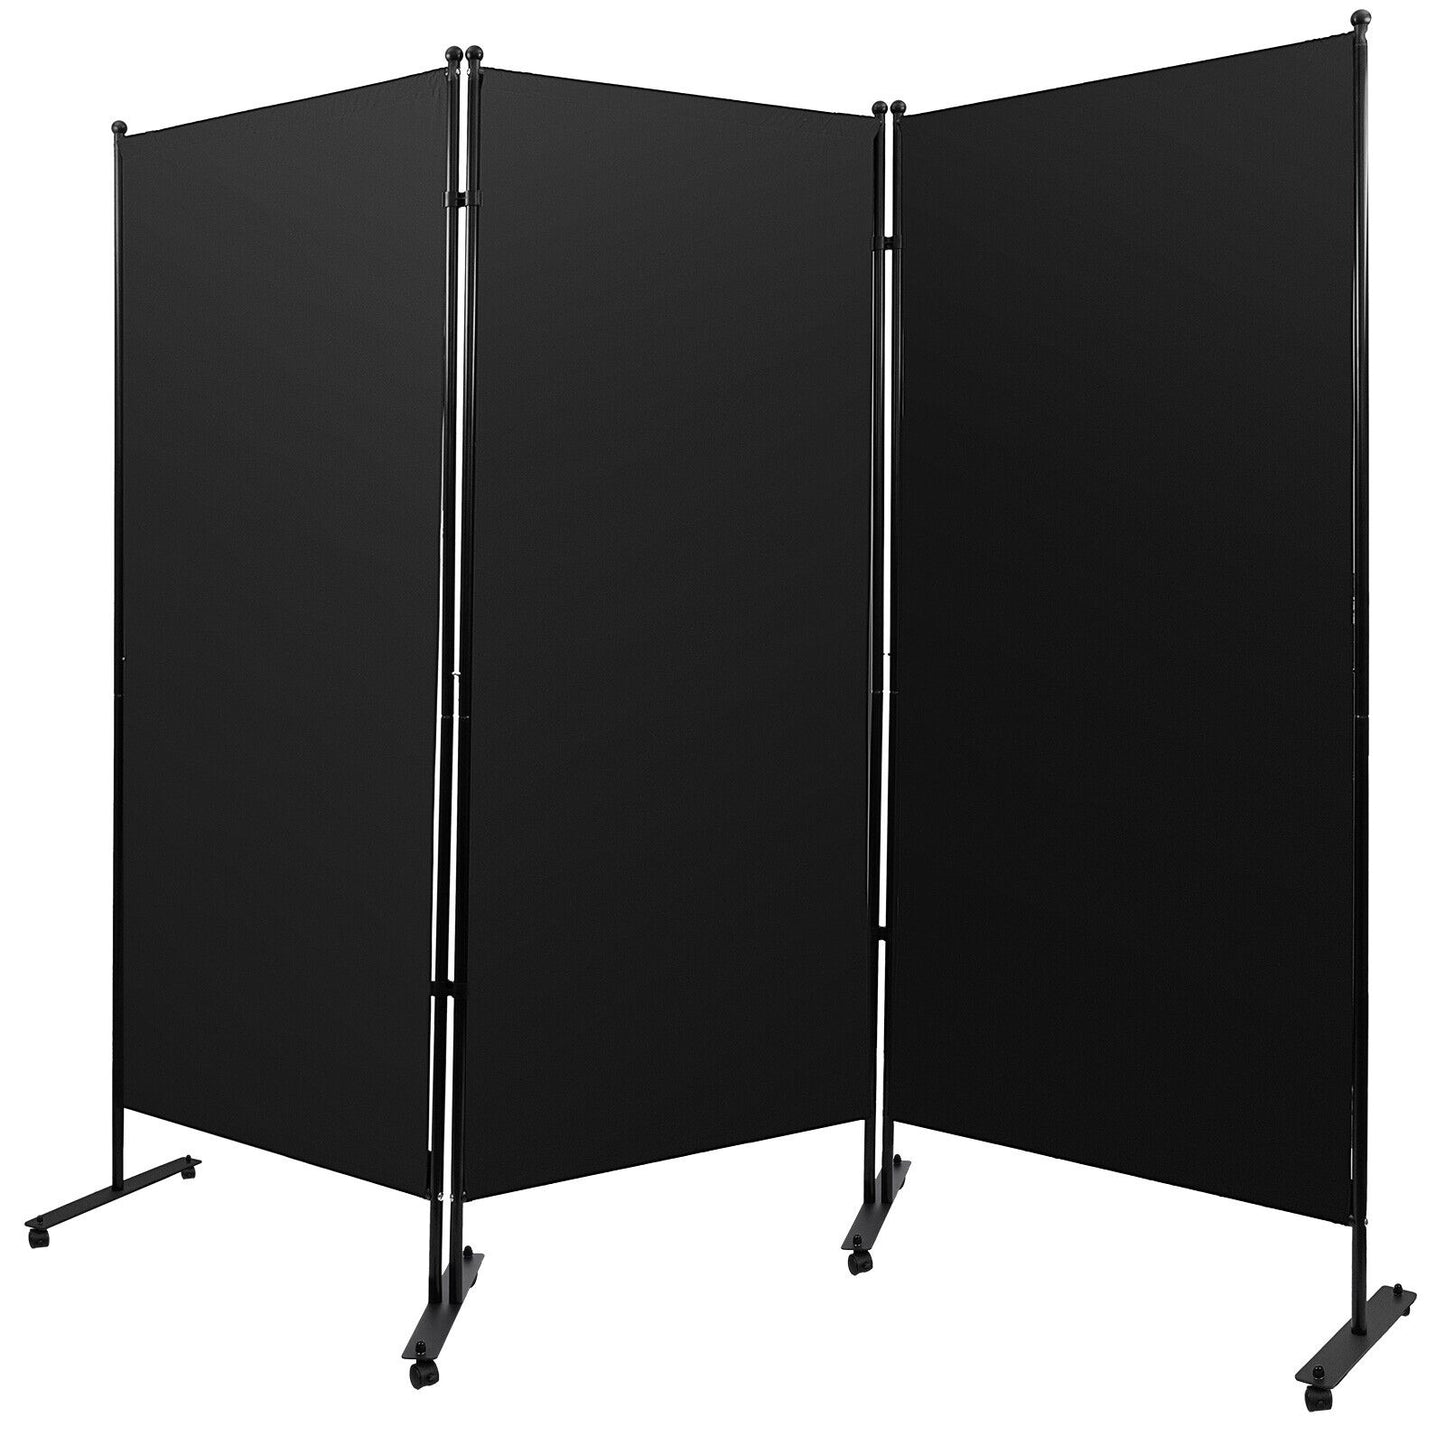 Room Divider with Wheels 3 Panel Room Divider Temporary Wall Portable Screen